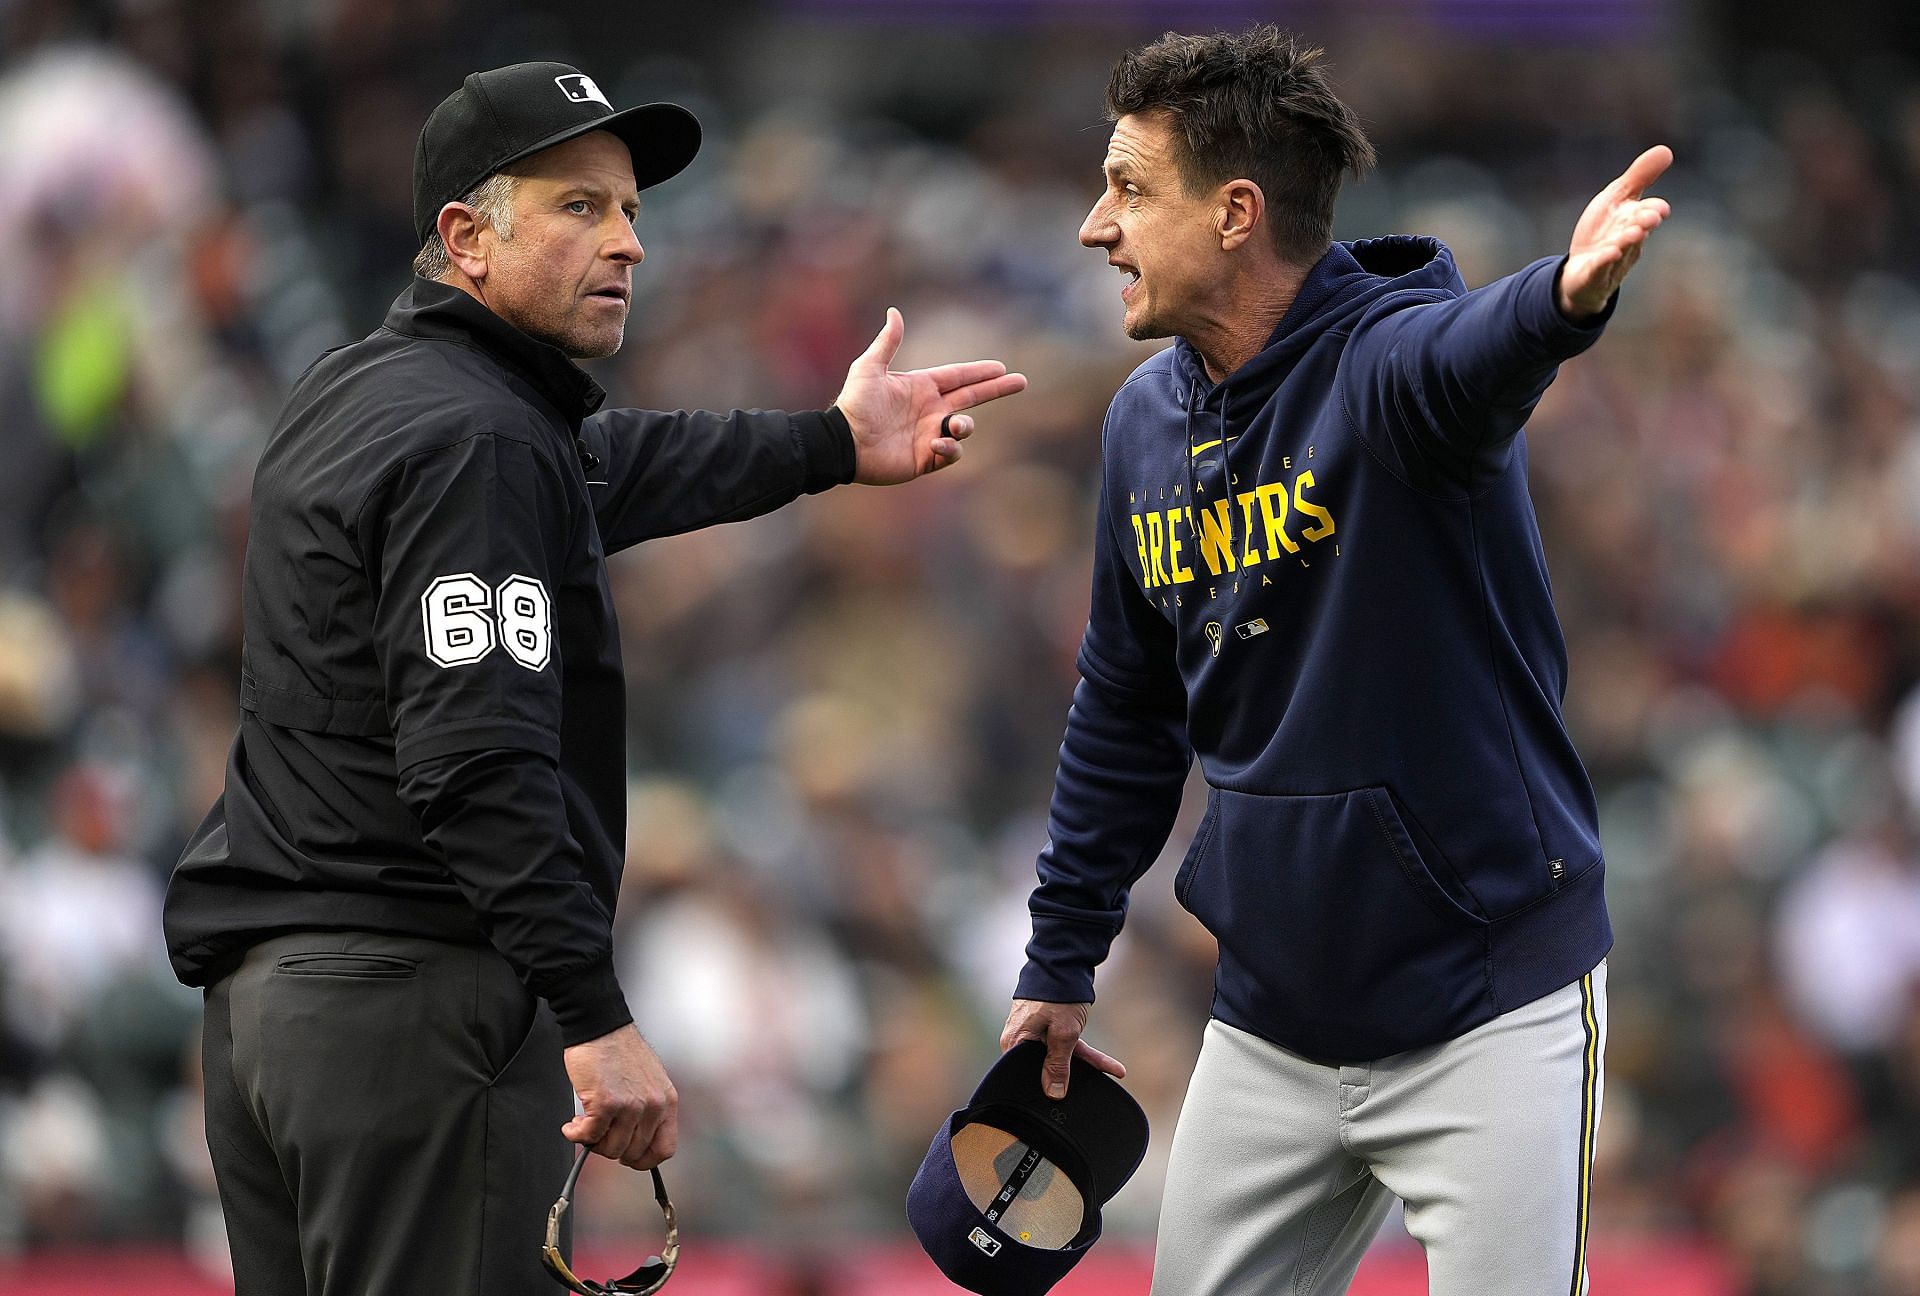 Brewers: Sorting Through 3 Facts And 3 Rumors Regarding Craig Counsell